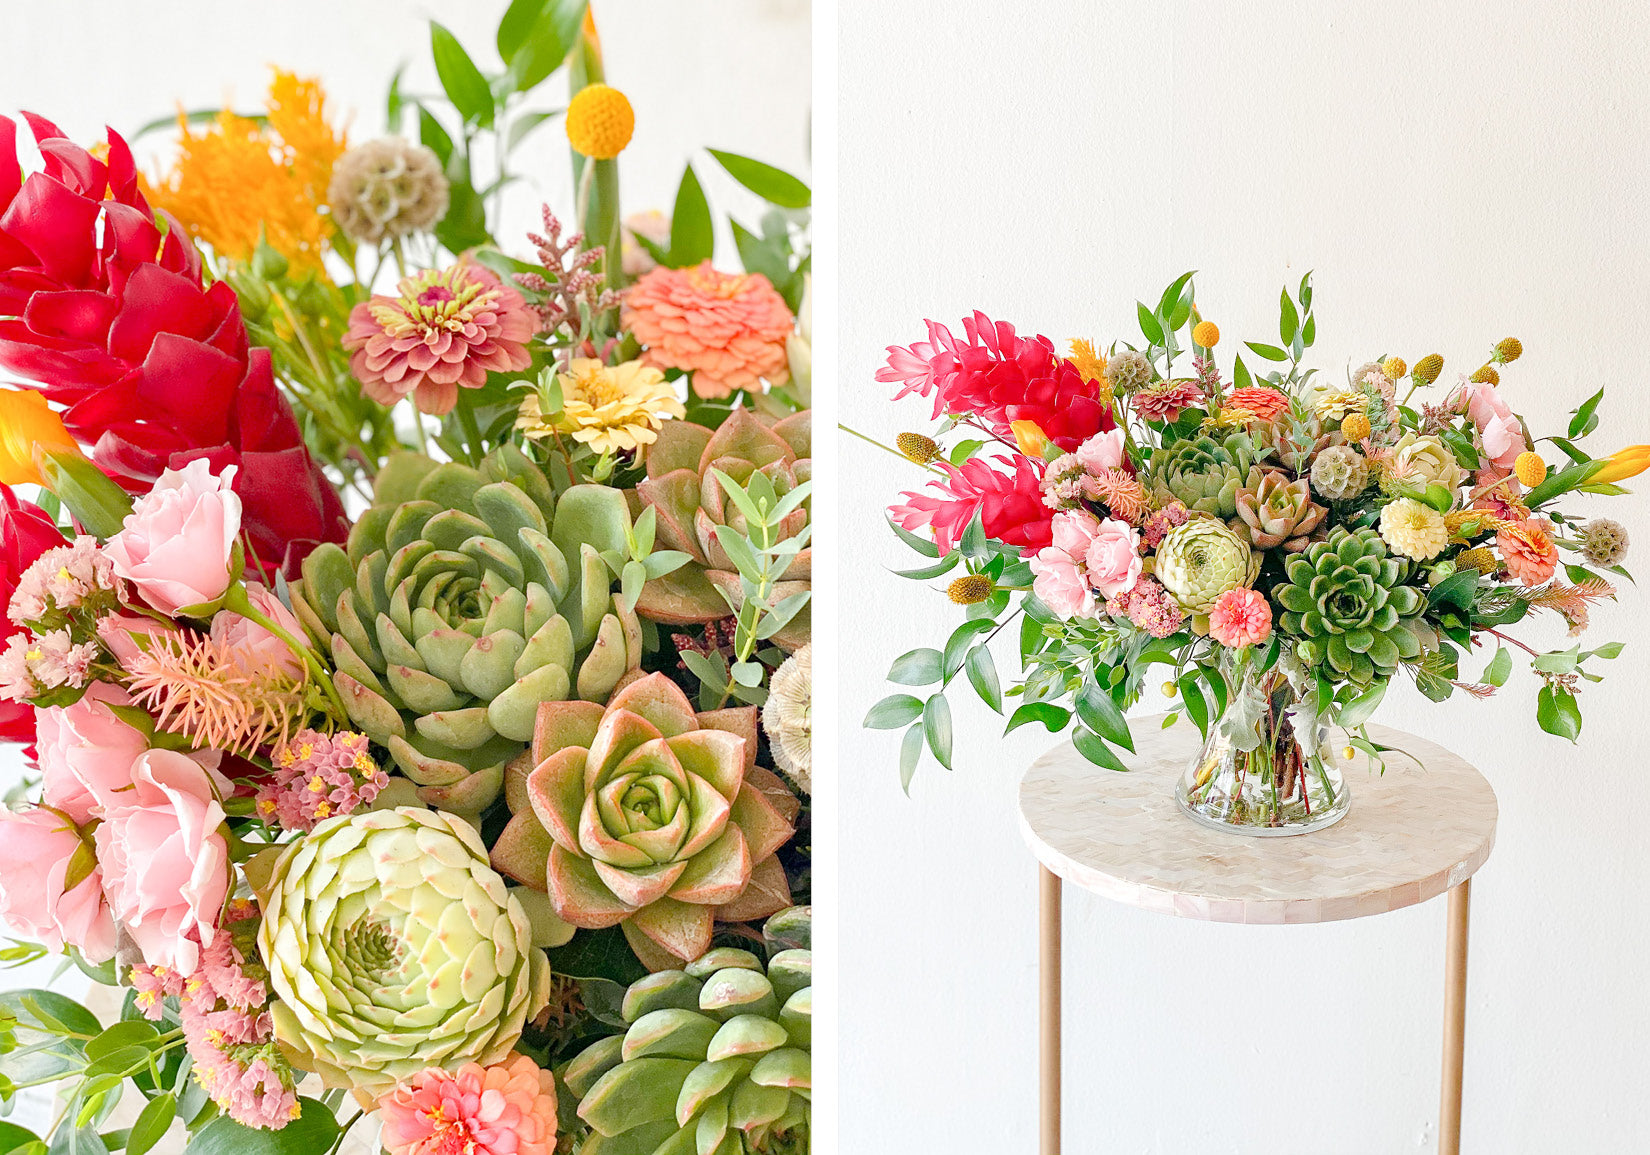 Succulents + Flowers = YES! – WildFlora